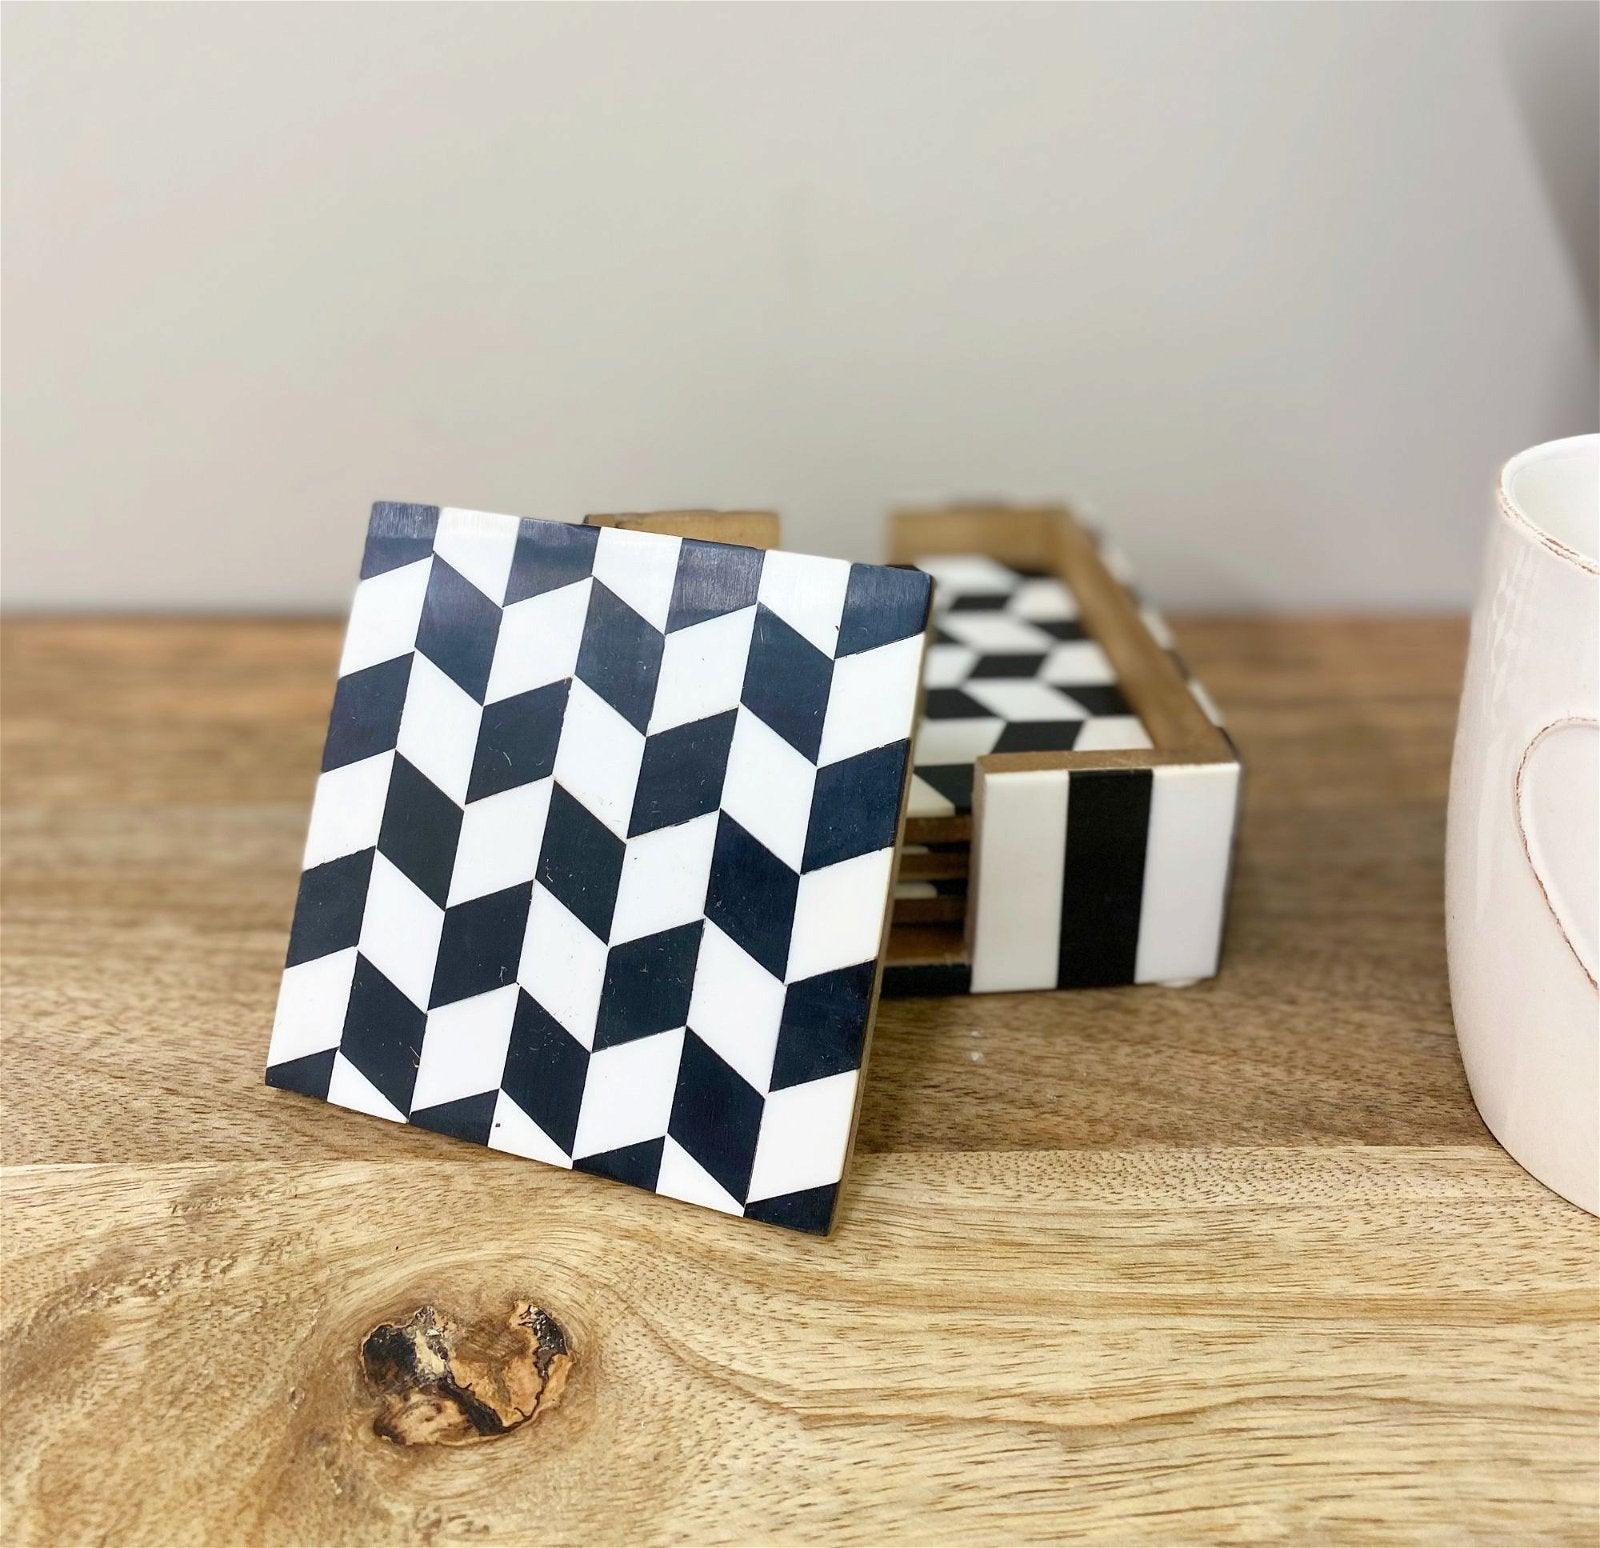 Pack of 4 Black & White Herringbone Wooden Coasters-Coasters & Placemats